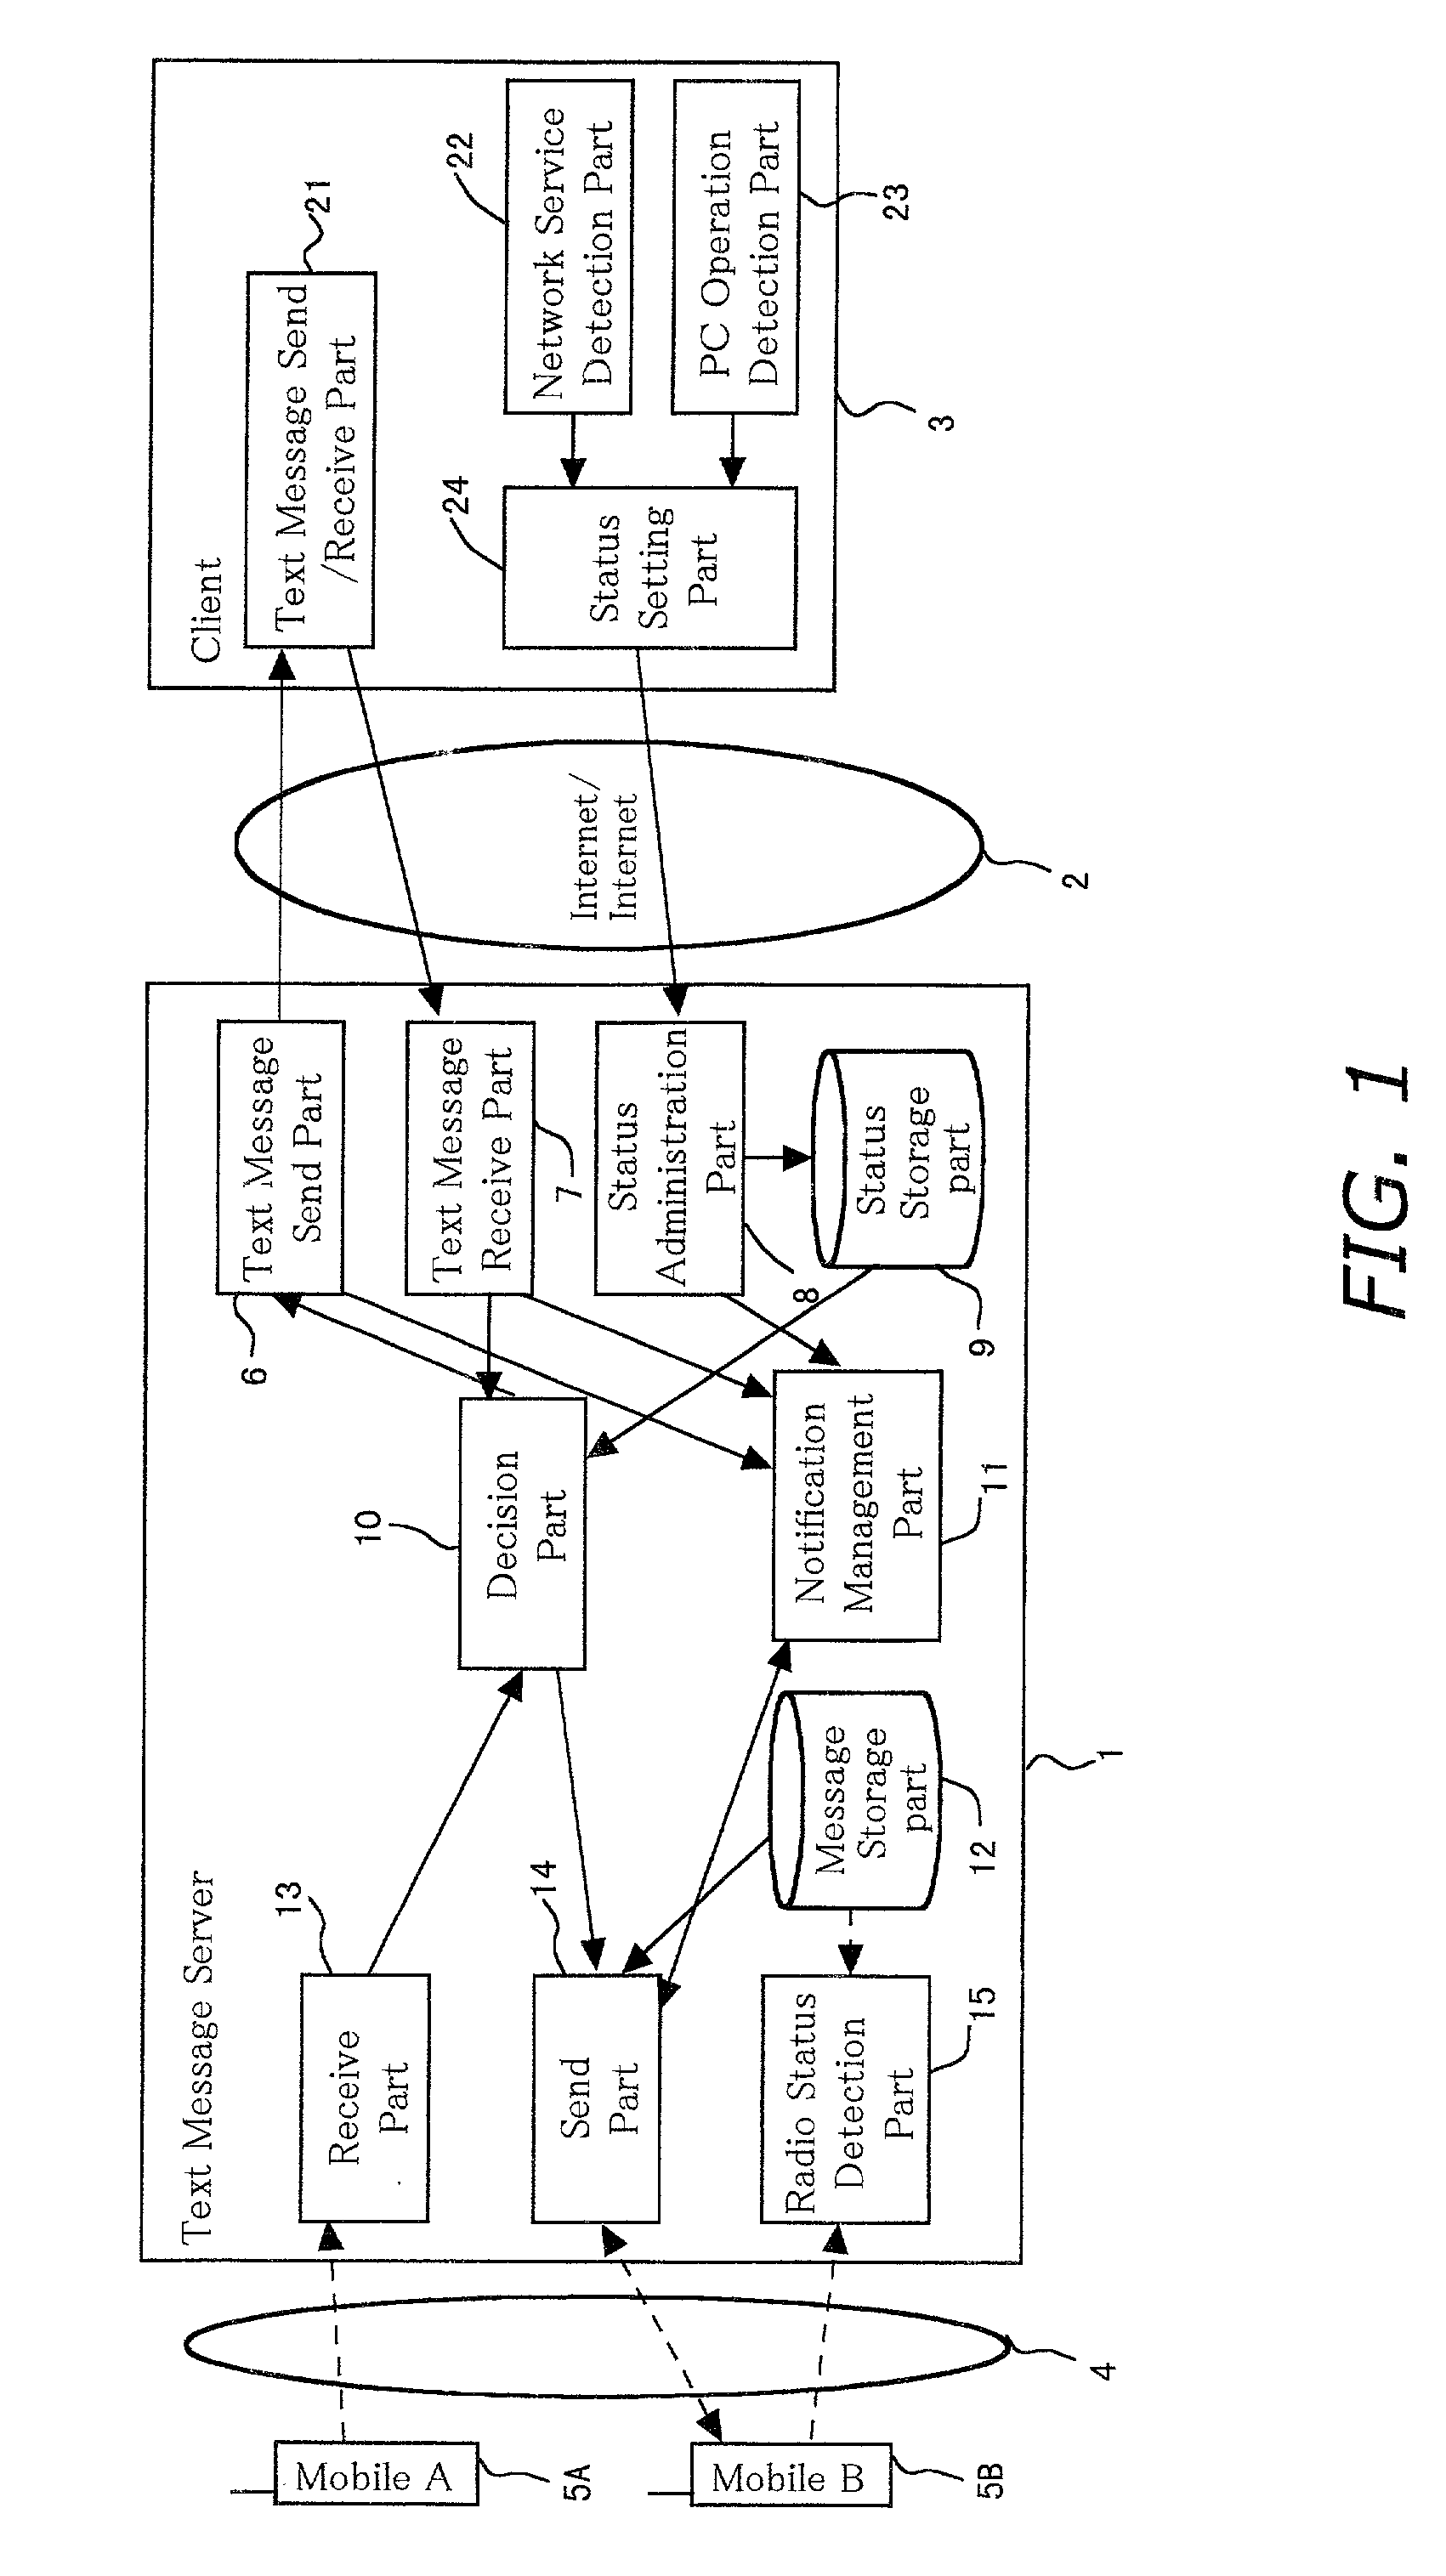 Text messaging system and method